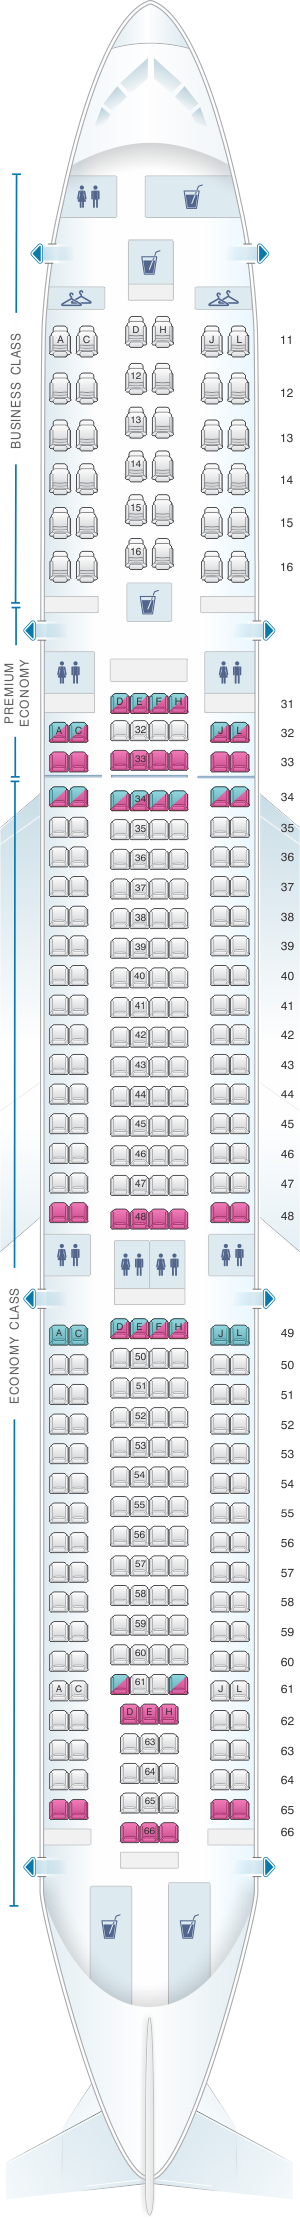 Seat map for Air China Airbus A330 300 (311PAX)